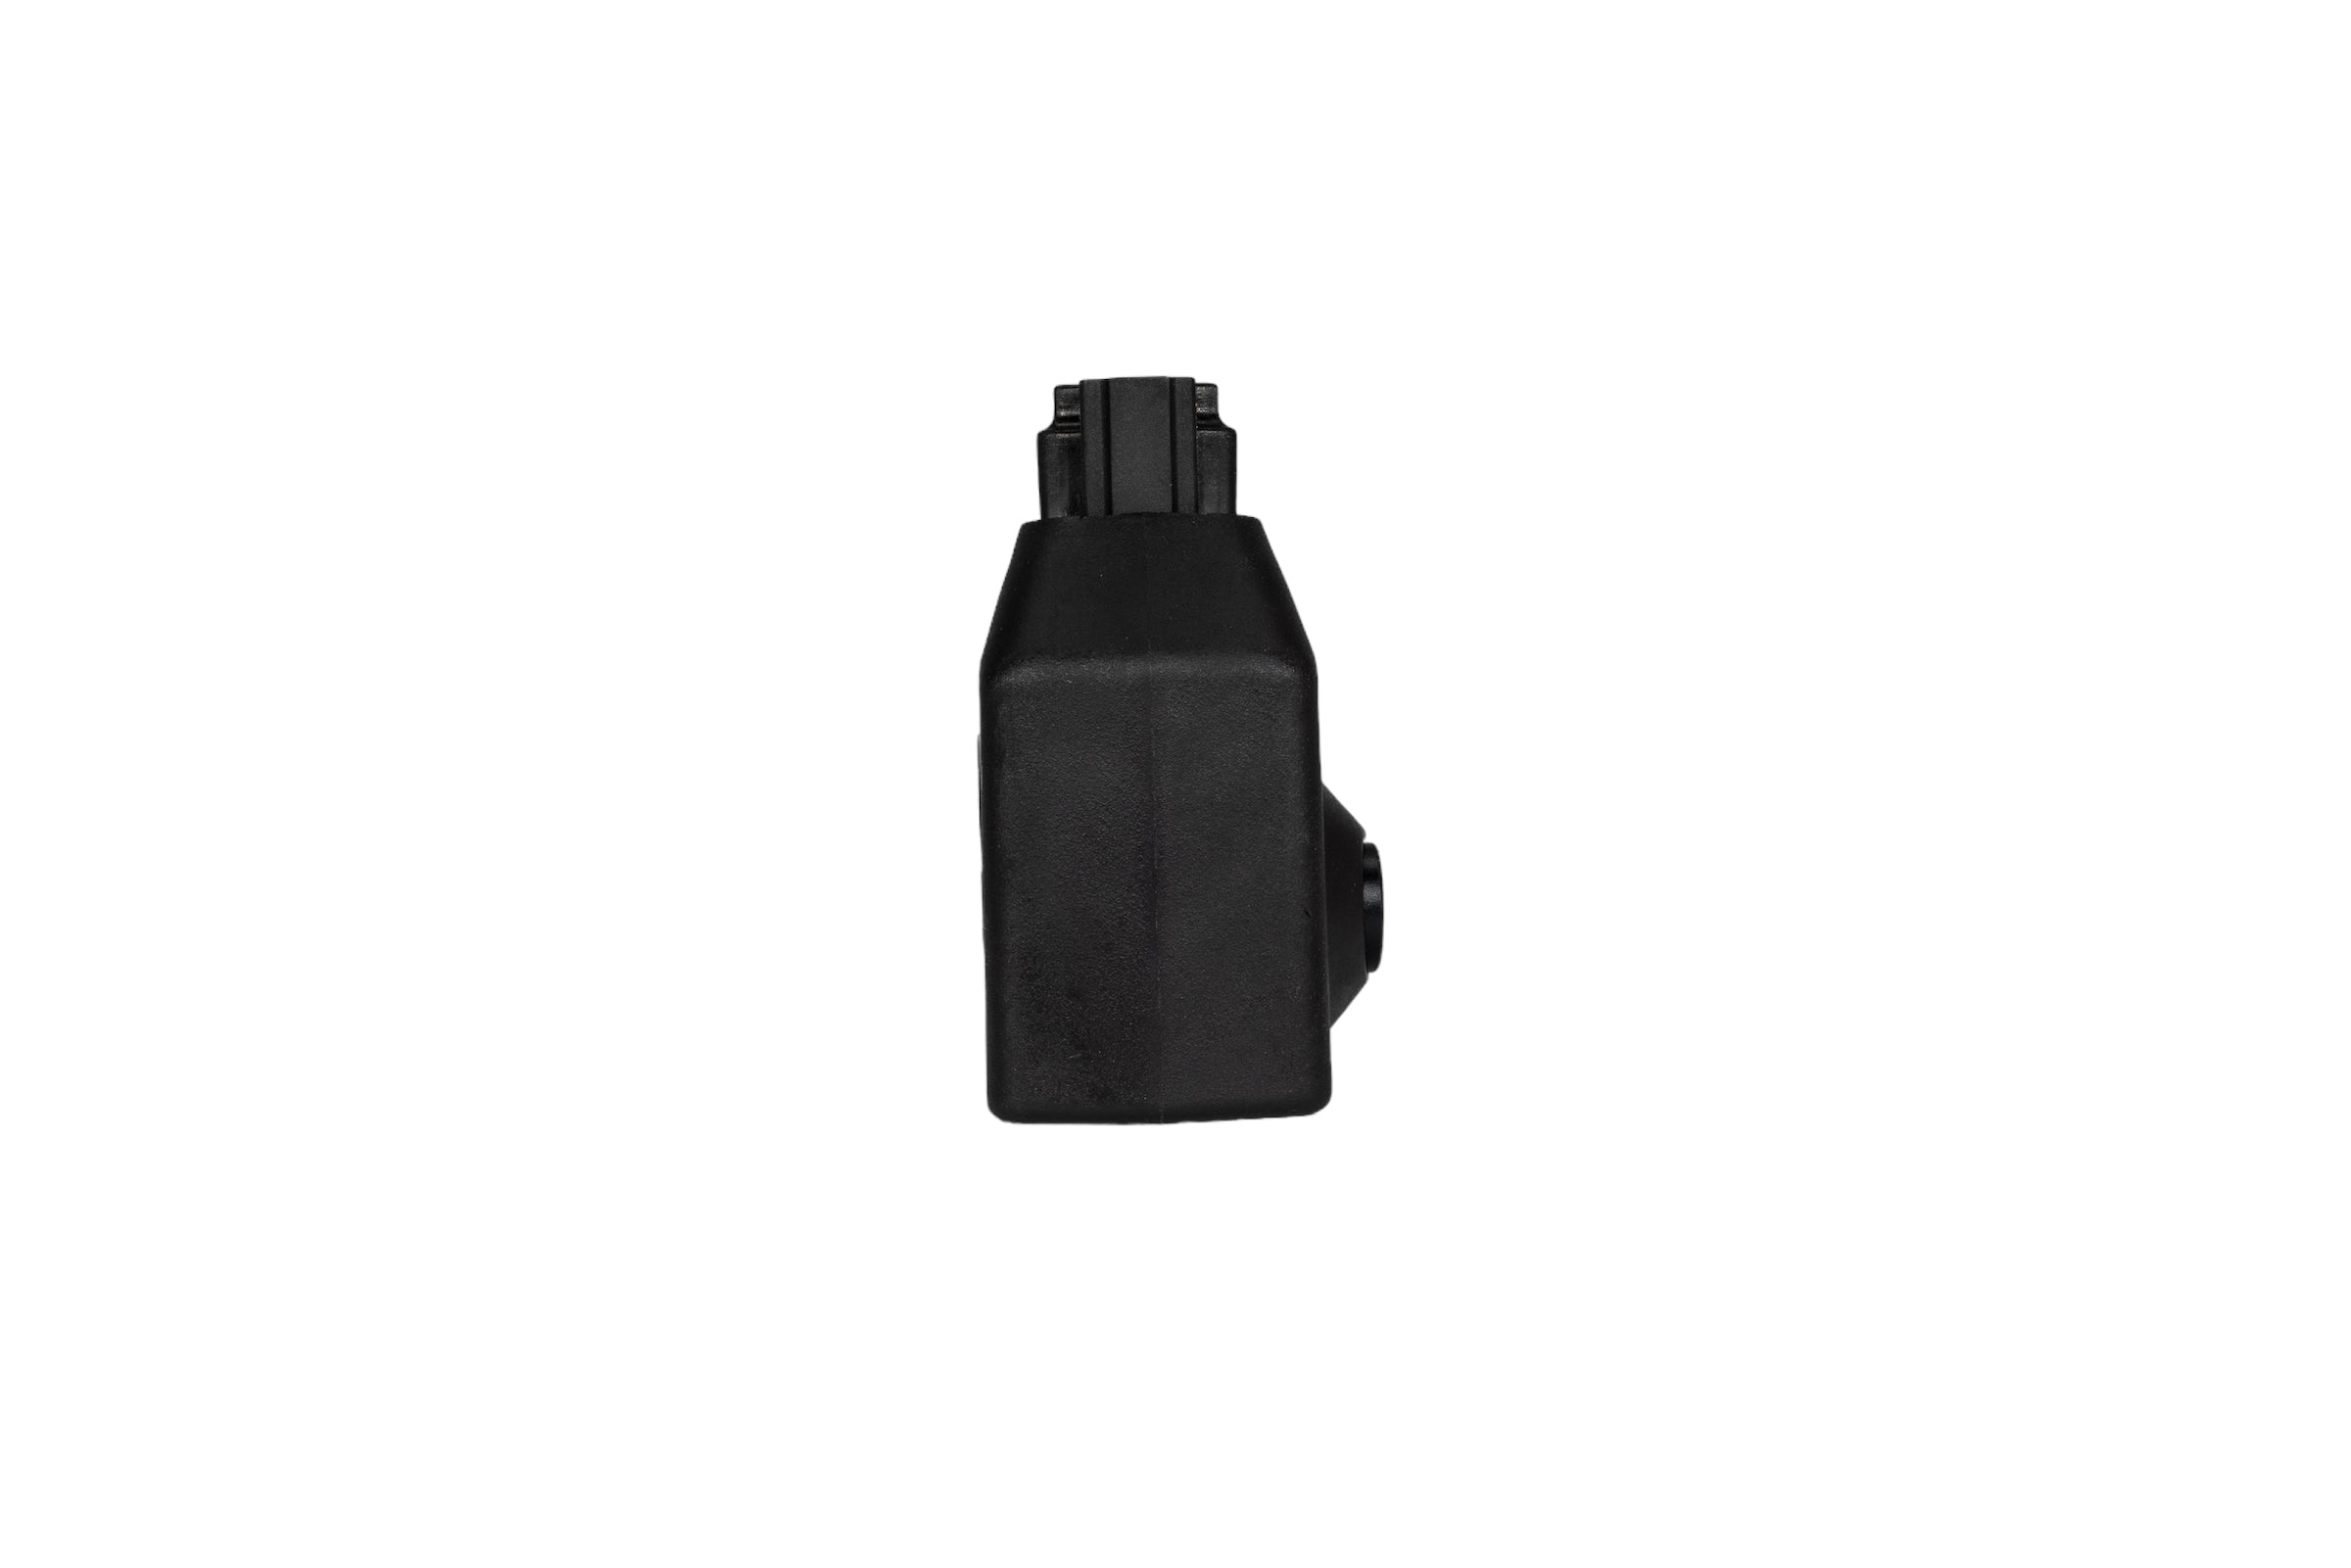 Primary Airsoft Universal Hi-Capa HPA/M4 Adapter - ssairsoft.com